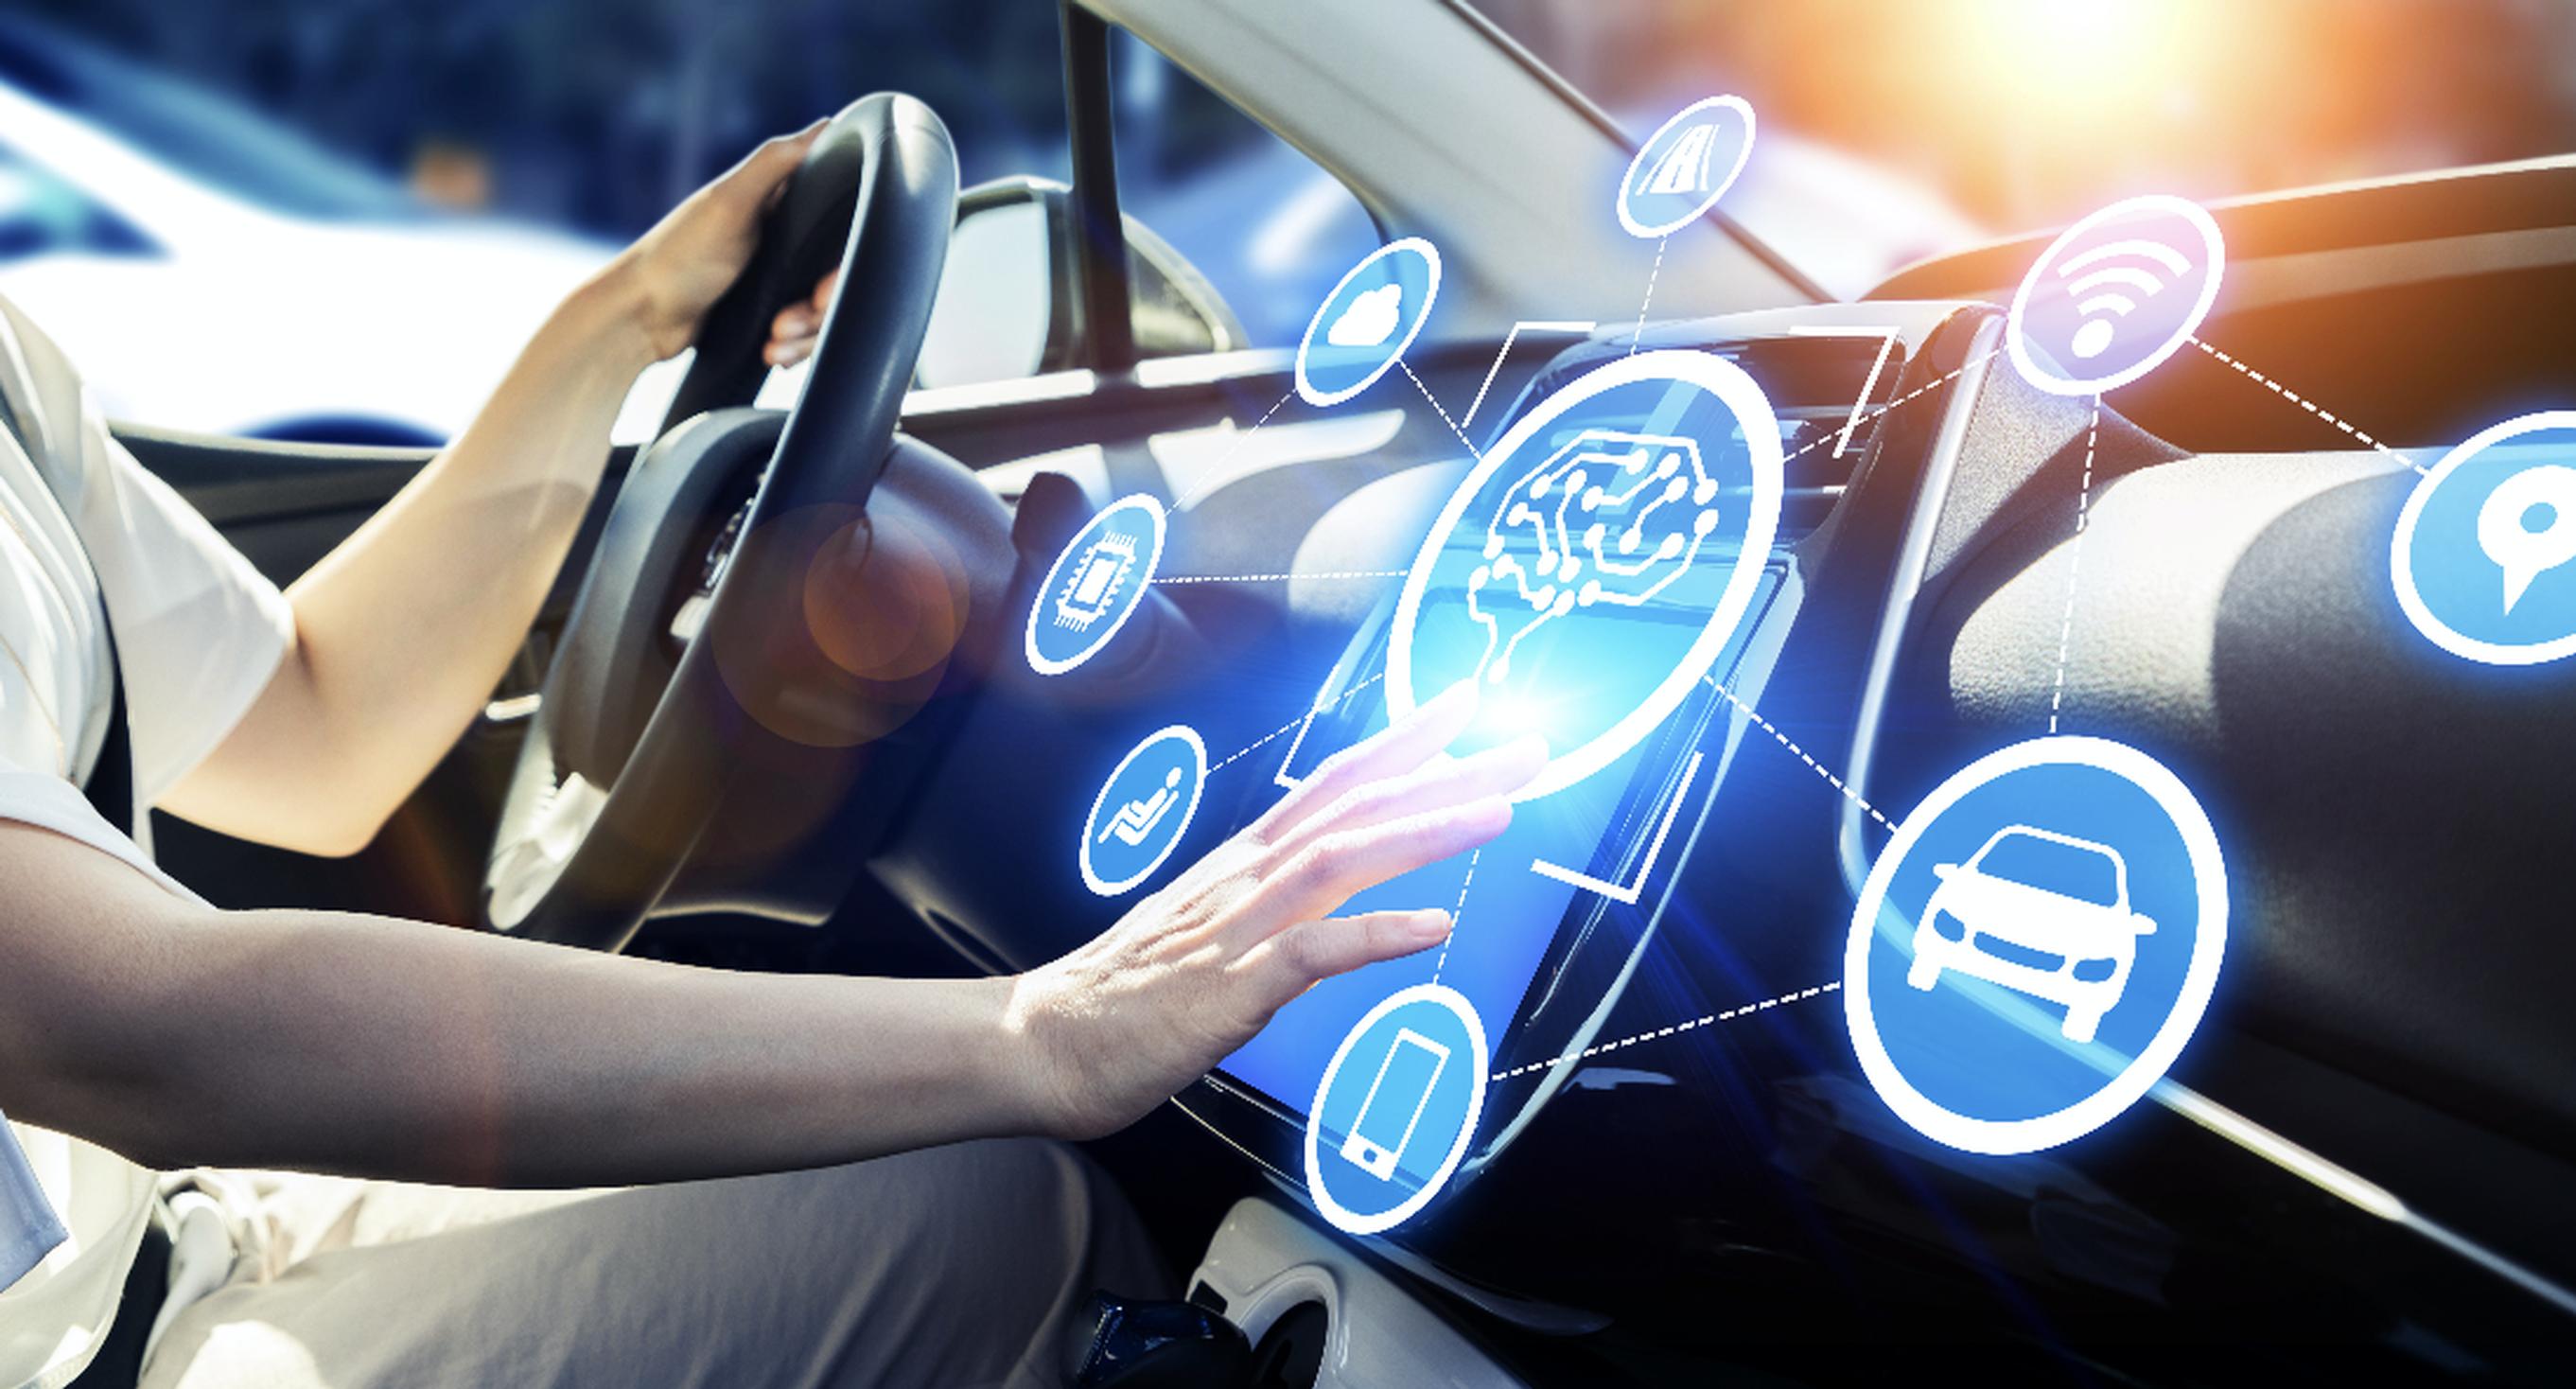 0% of US consumers do not trust anyone to manage the vast amount of data being collected by connected vehicles